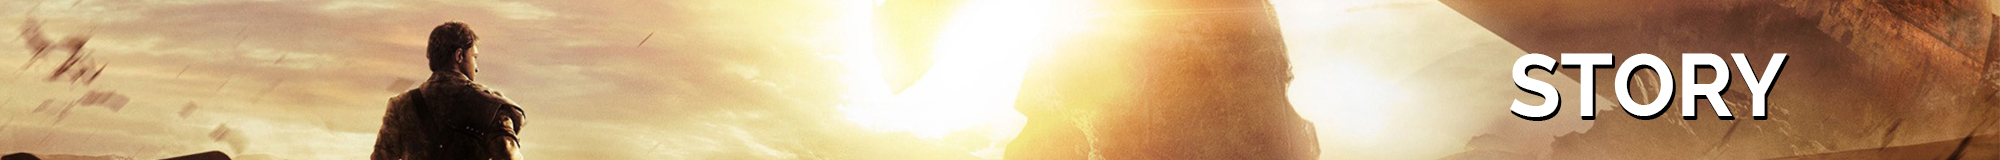 BANNER_MM_0002_STORY